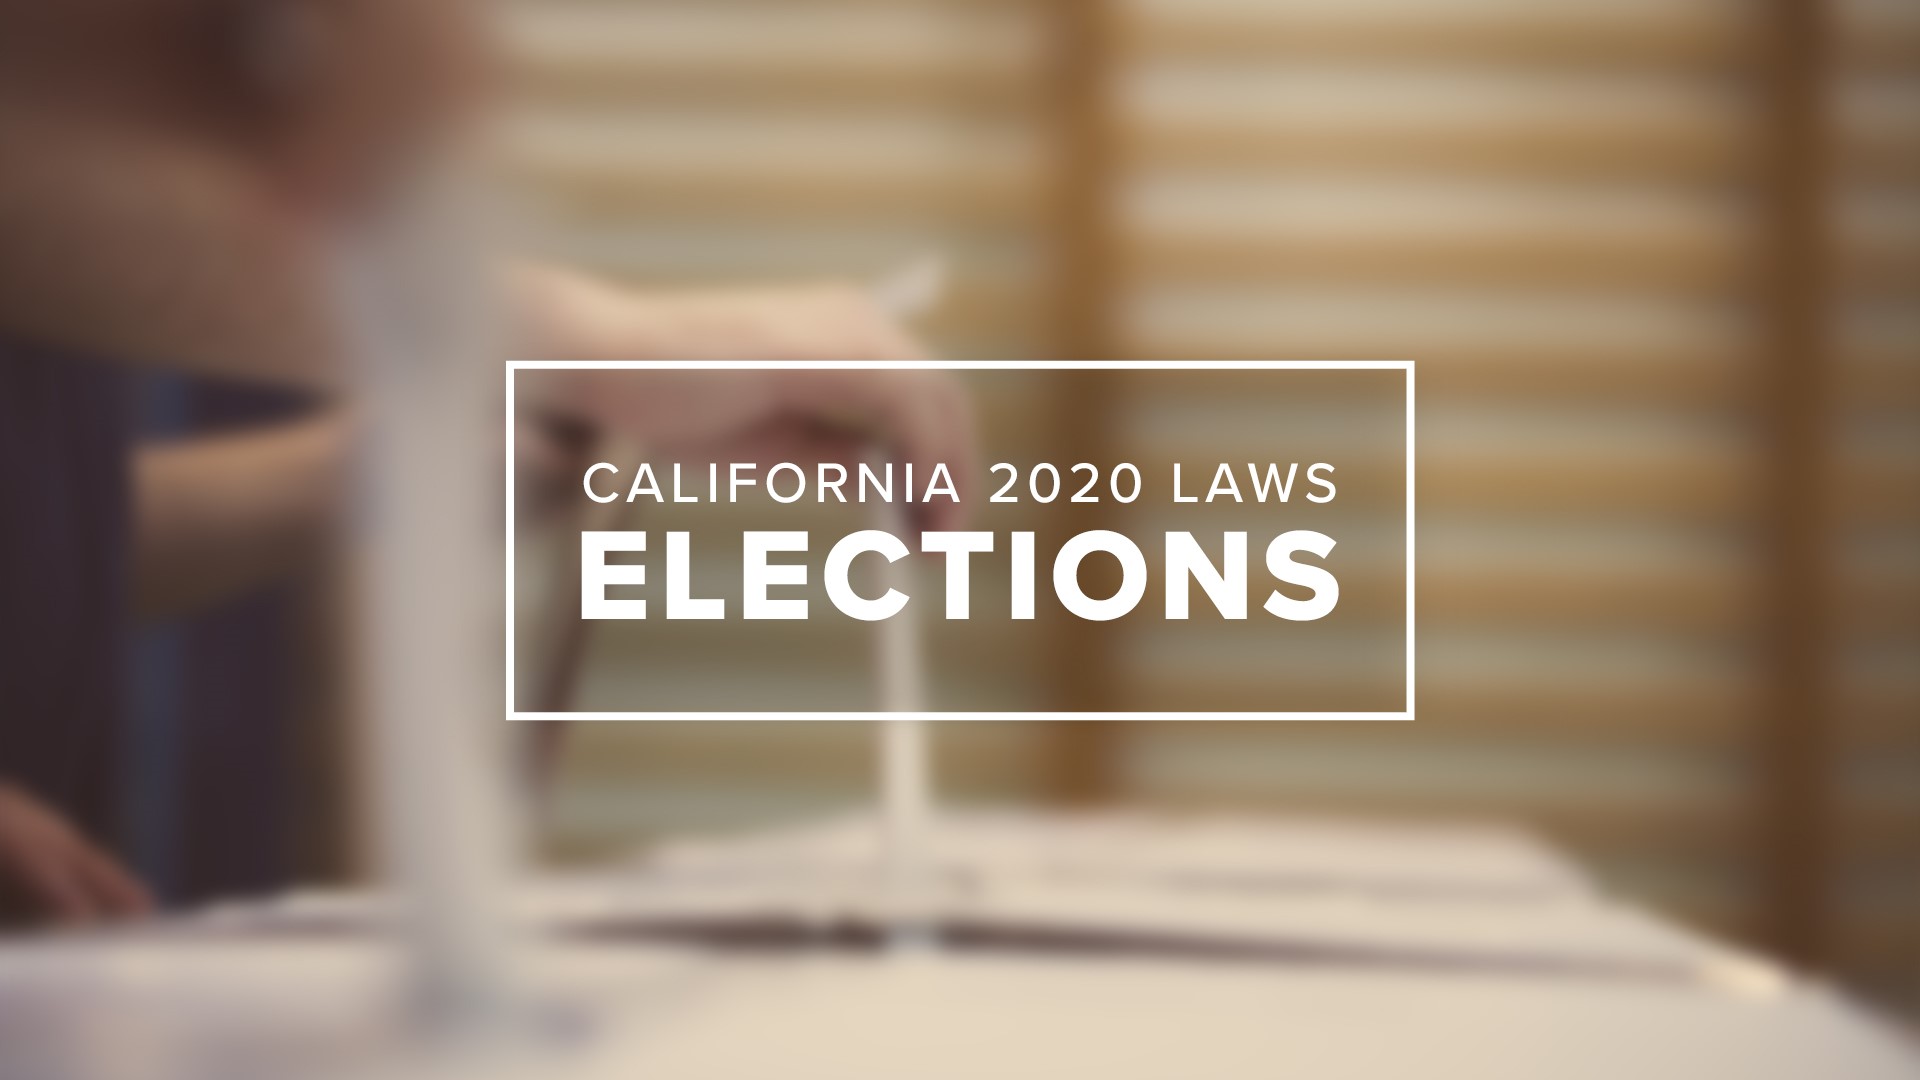 California's new election laws Here's what's changing in 2020